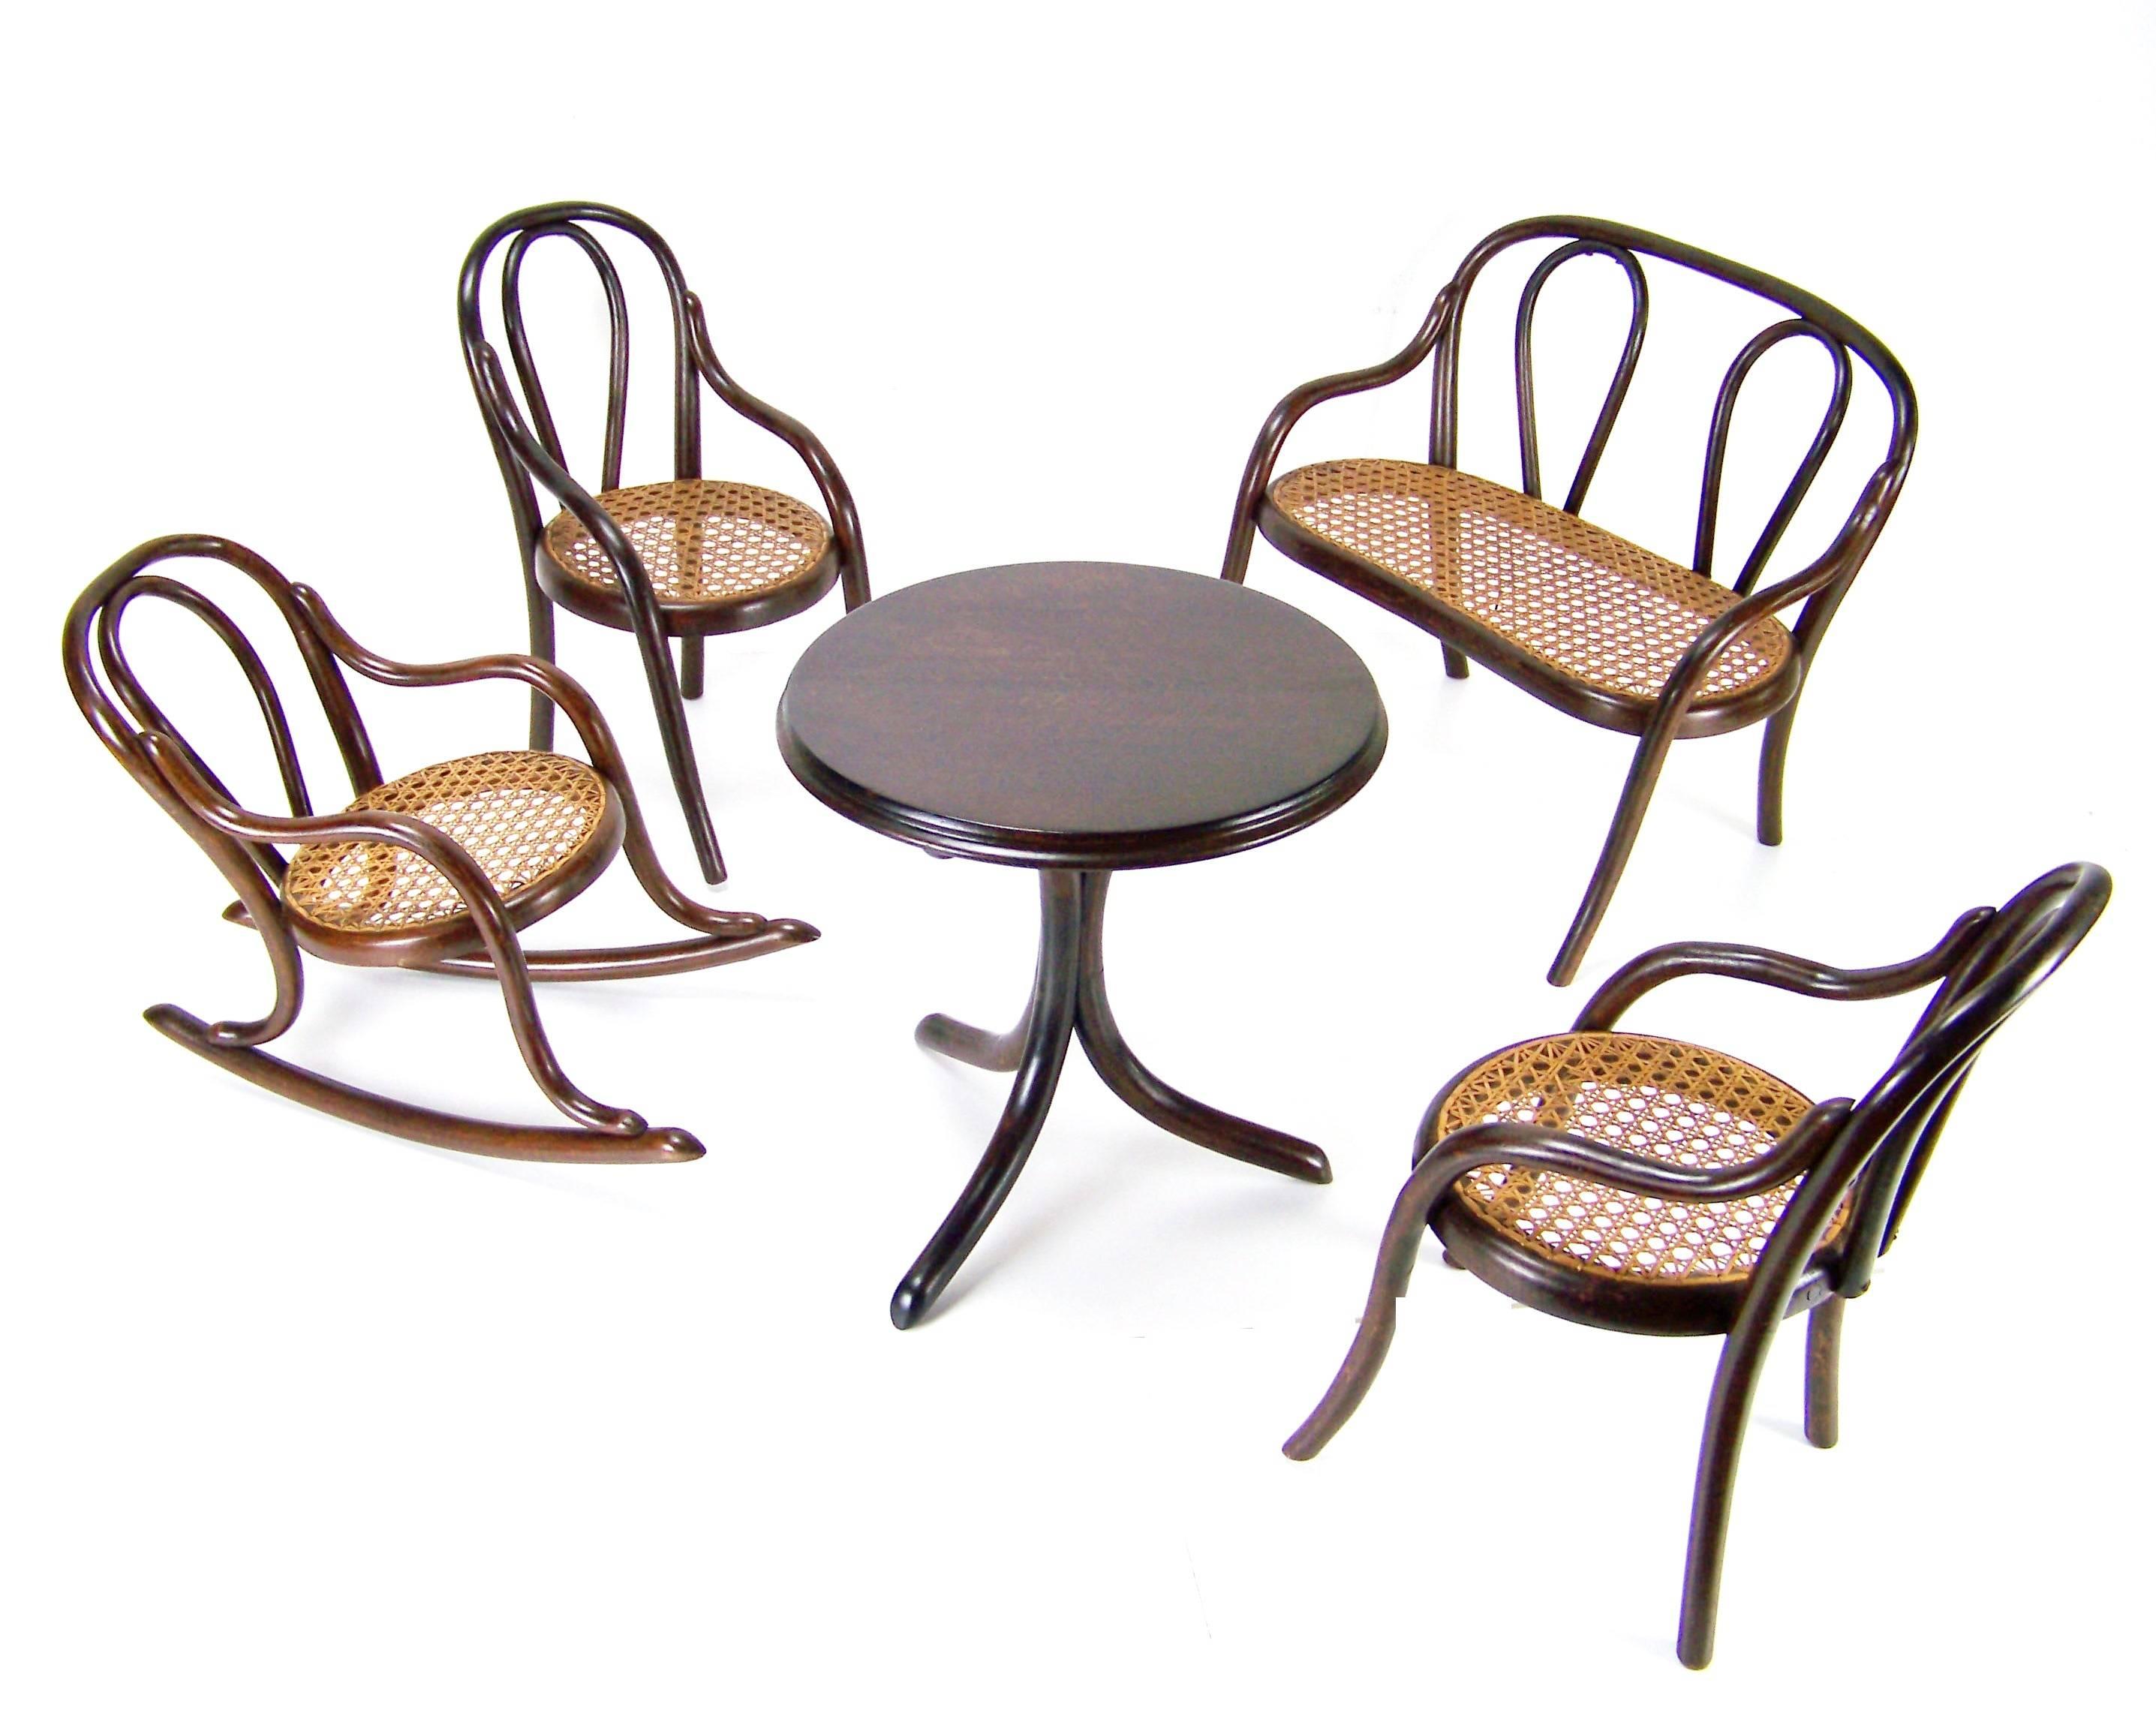 Manufactured in Austria by the Gebrüder Thonet company. In the production program was included around the year 1890. Newly restored.